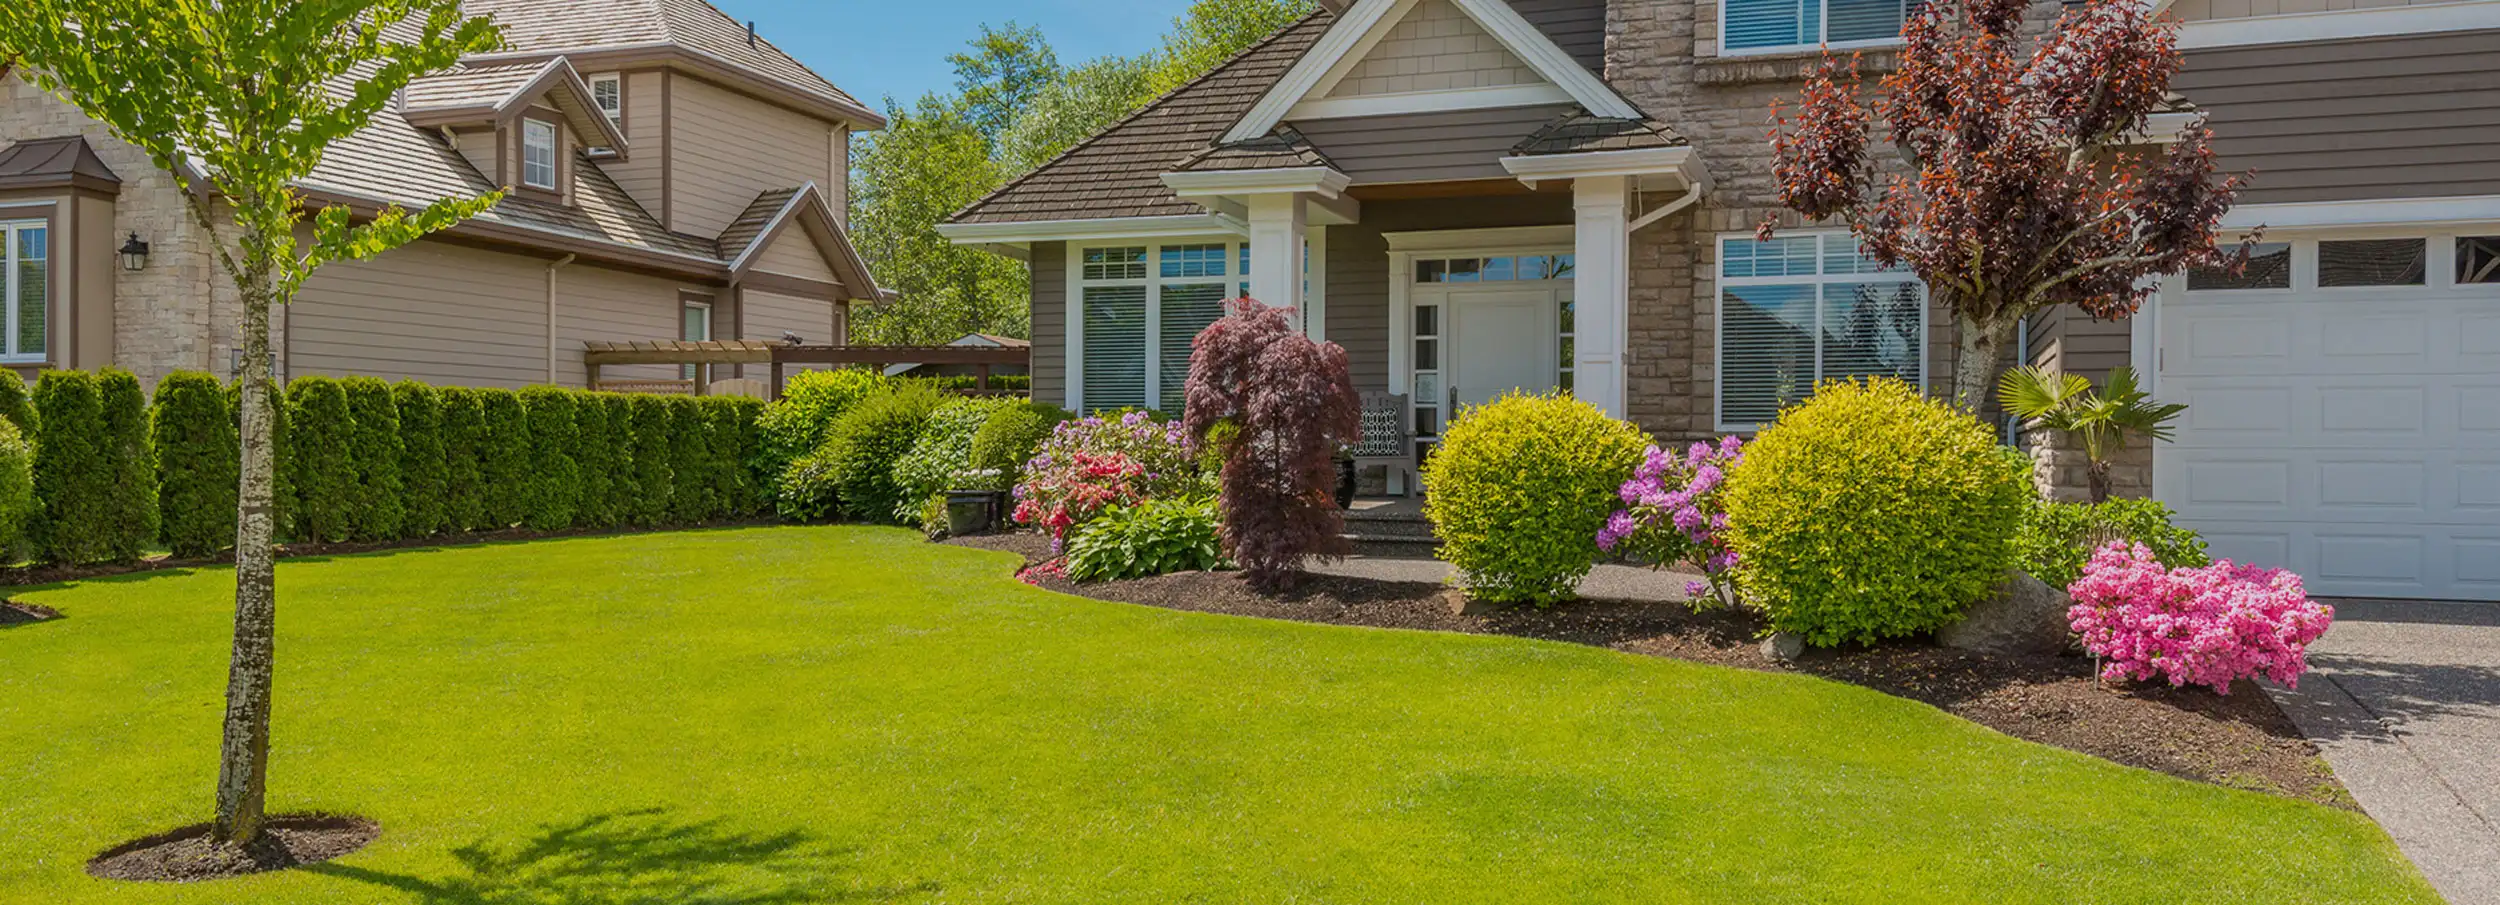 Home with landscaping grounds guys header image.